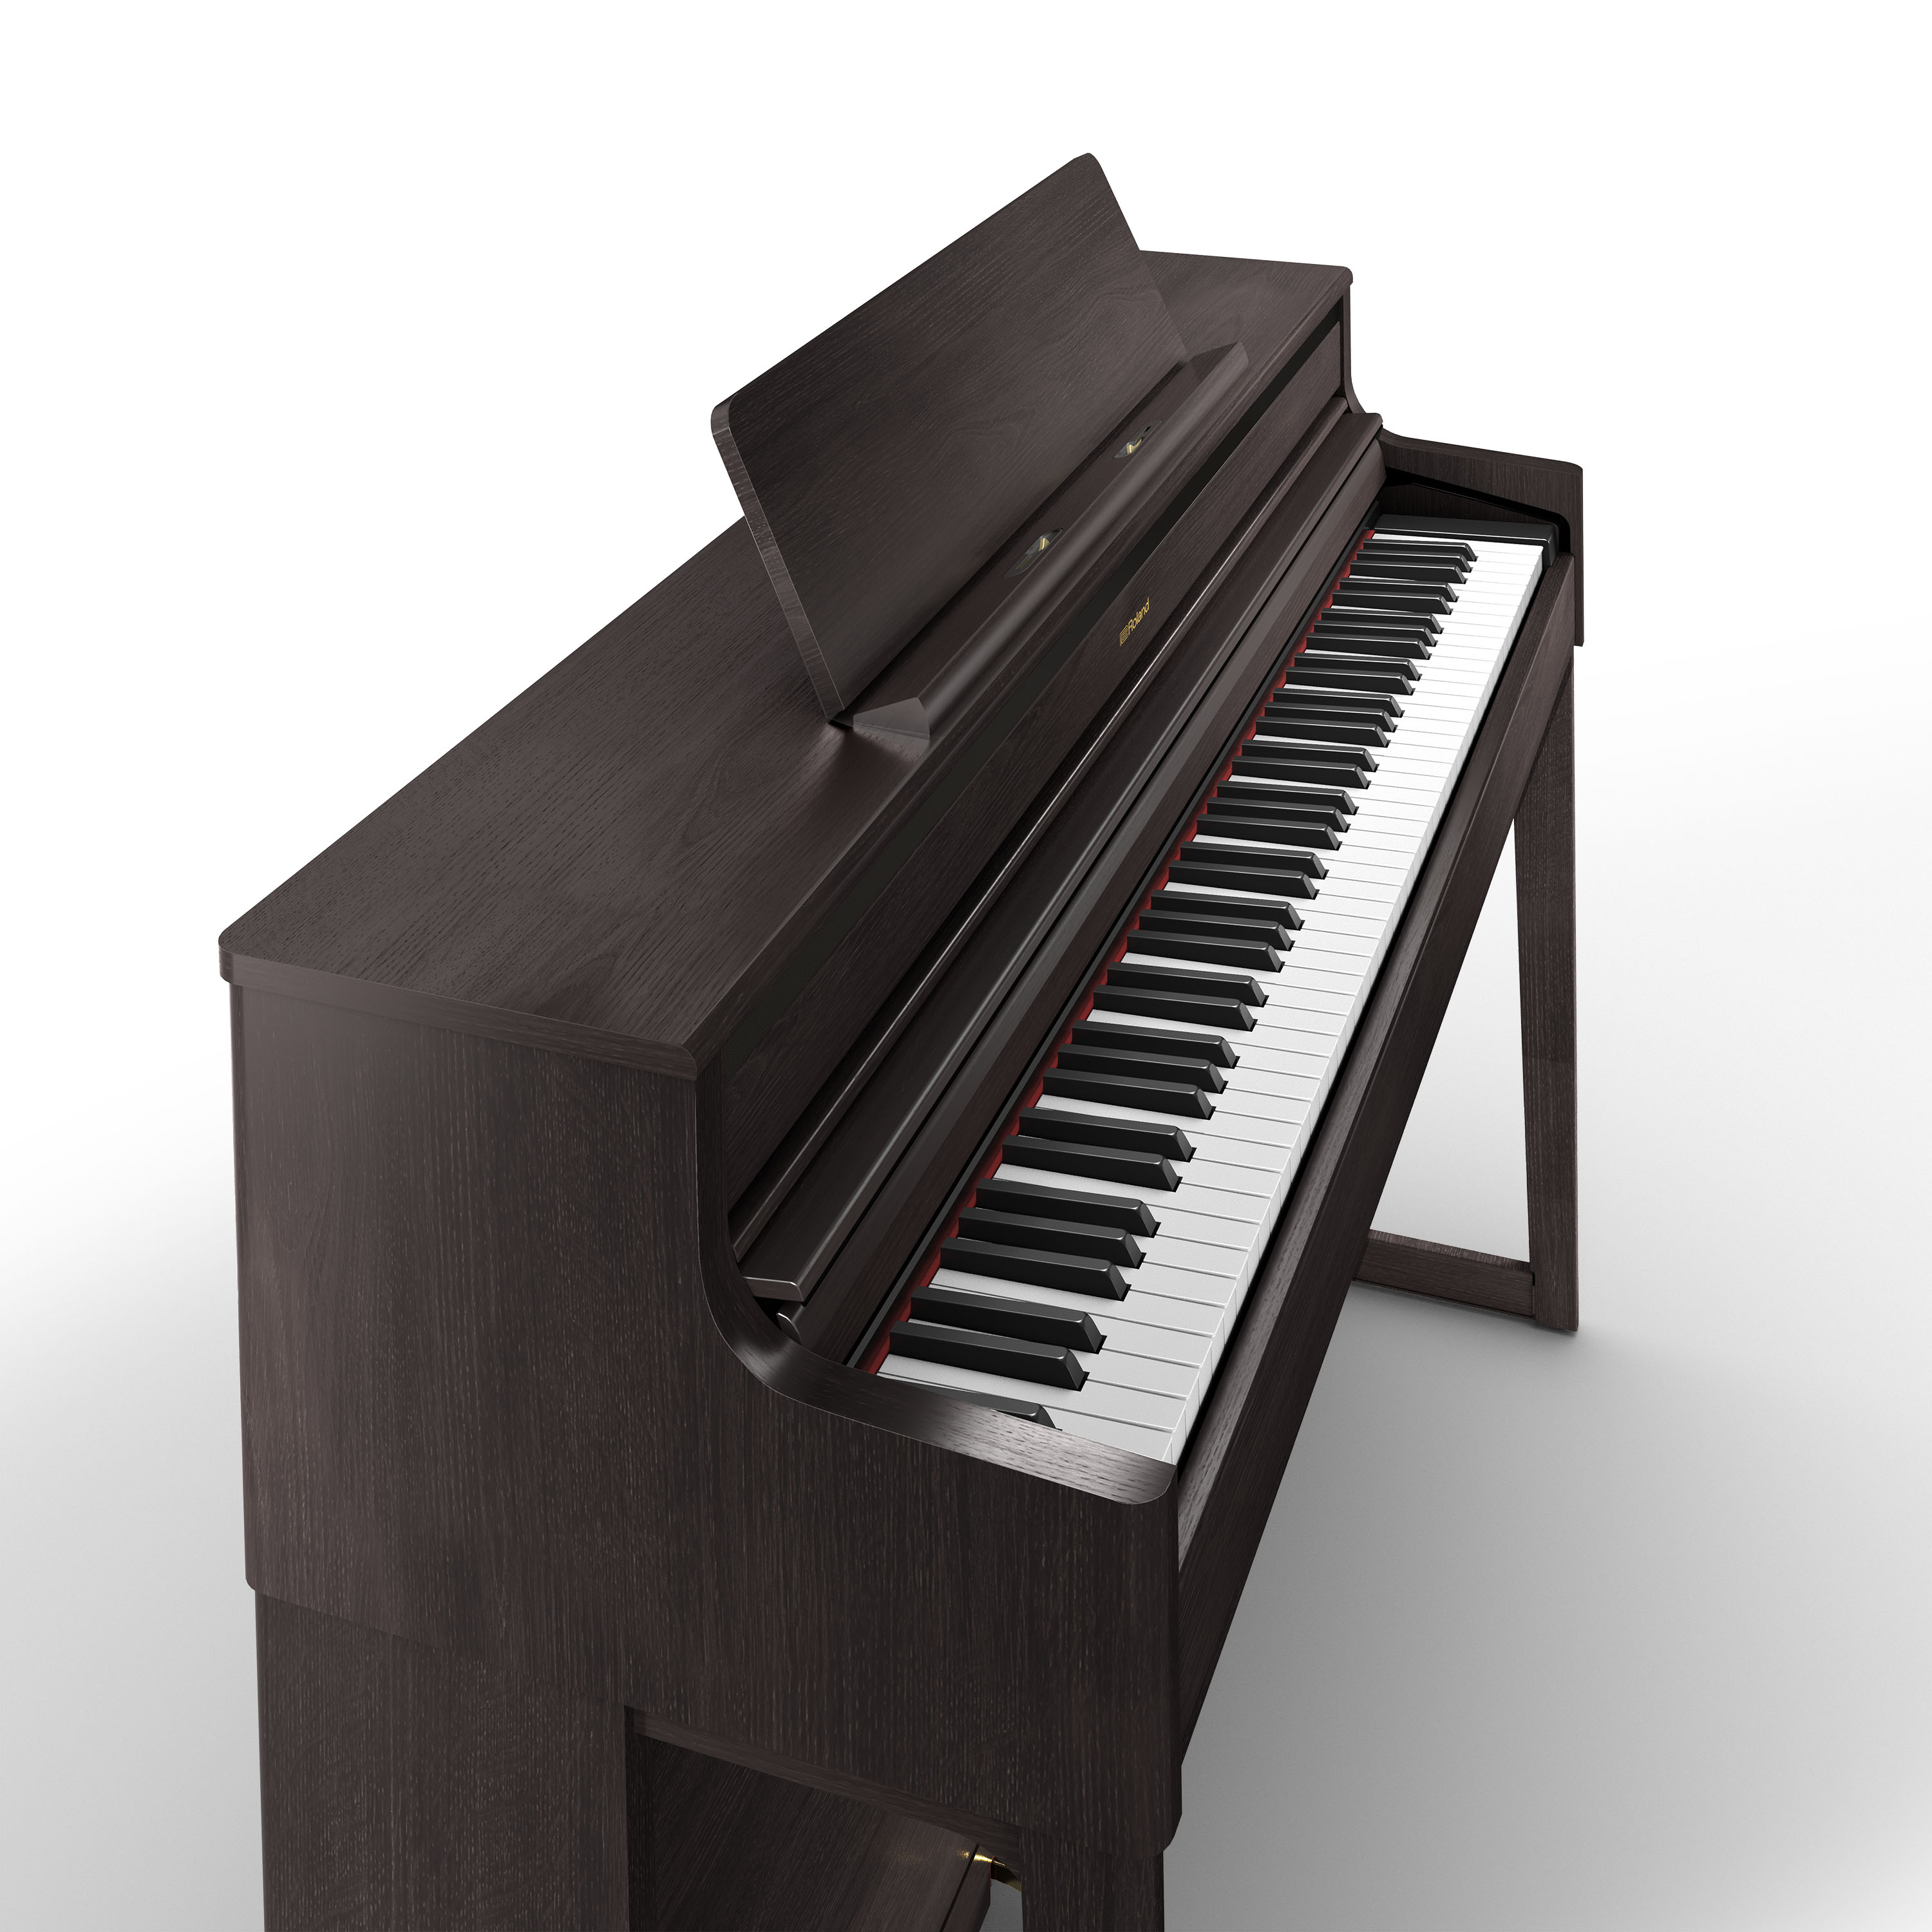 Roland Hp704 Dr Rosewood - Piano digital con mueble - Variation 3